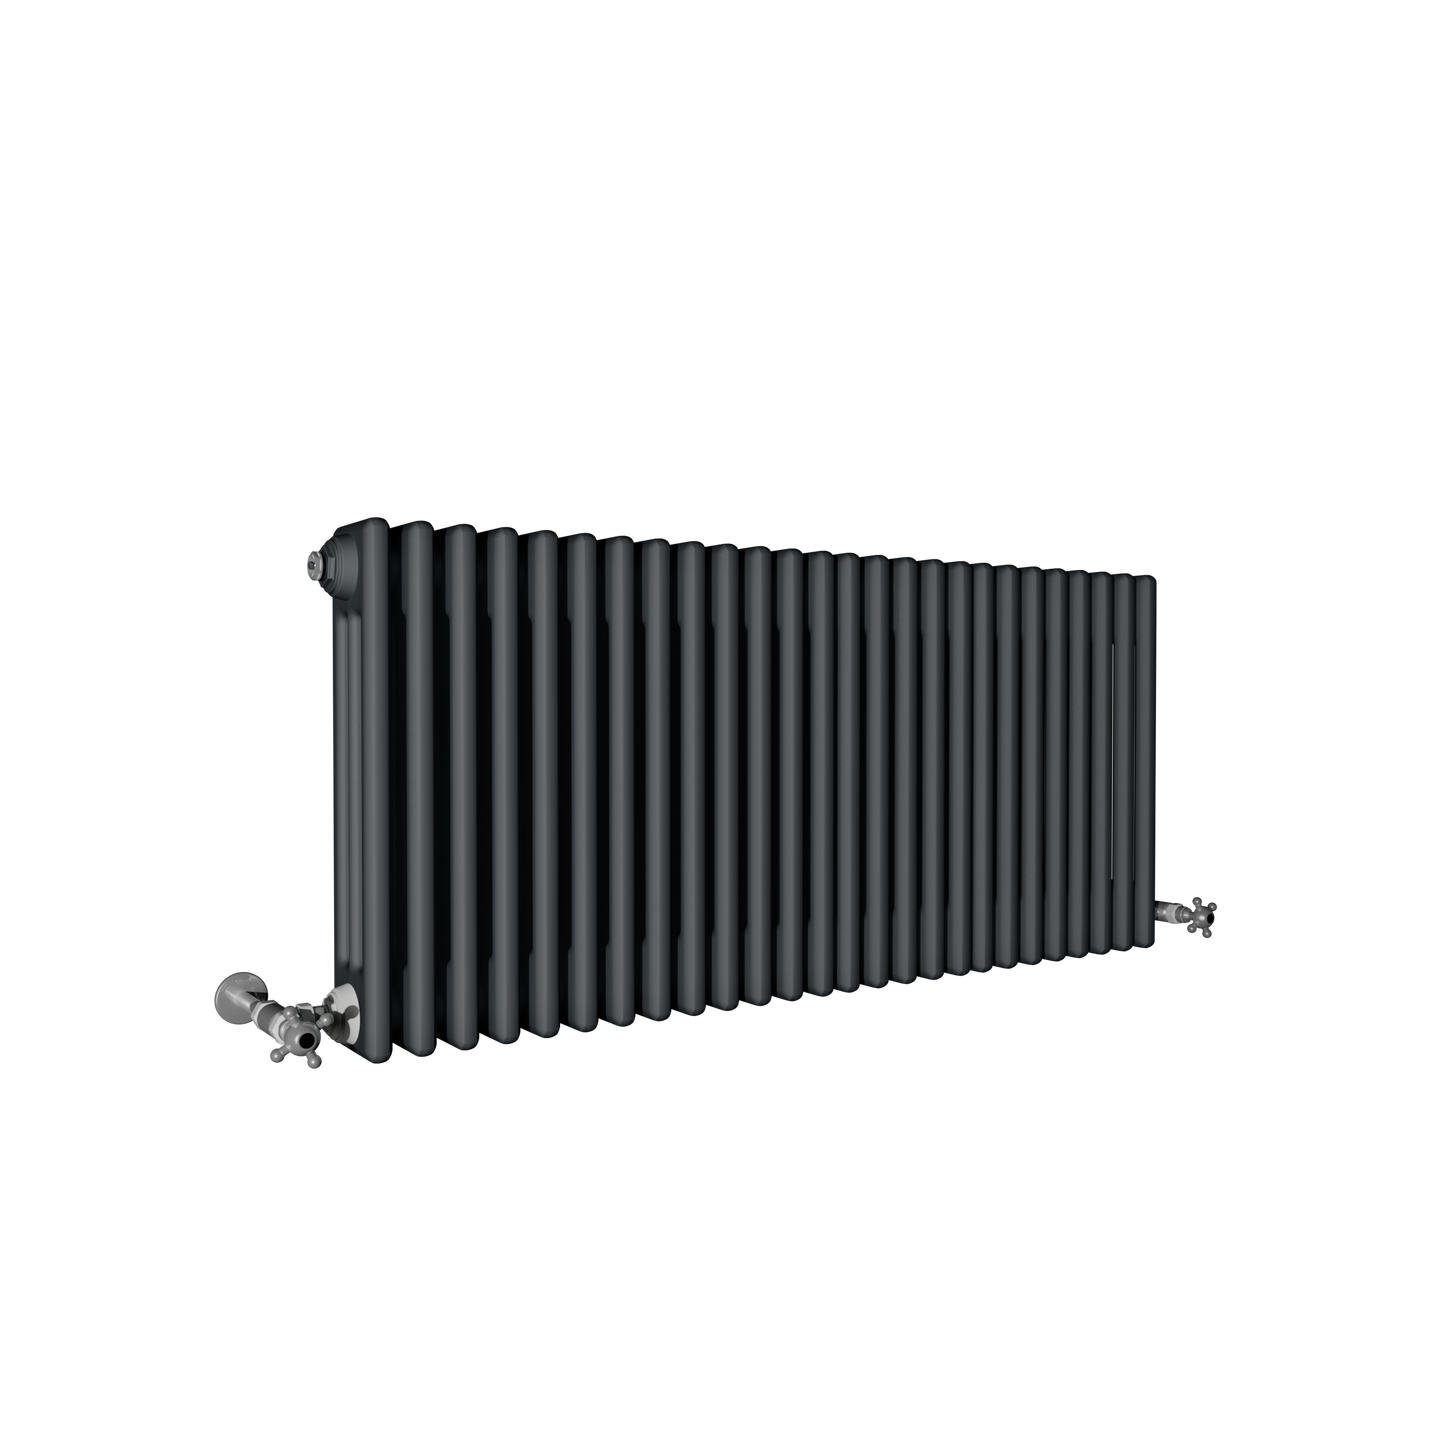 Traditional Column Anthracite Horizontal Radiator - Choice Of Width & Height